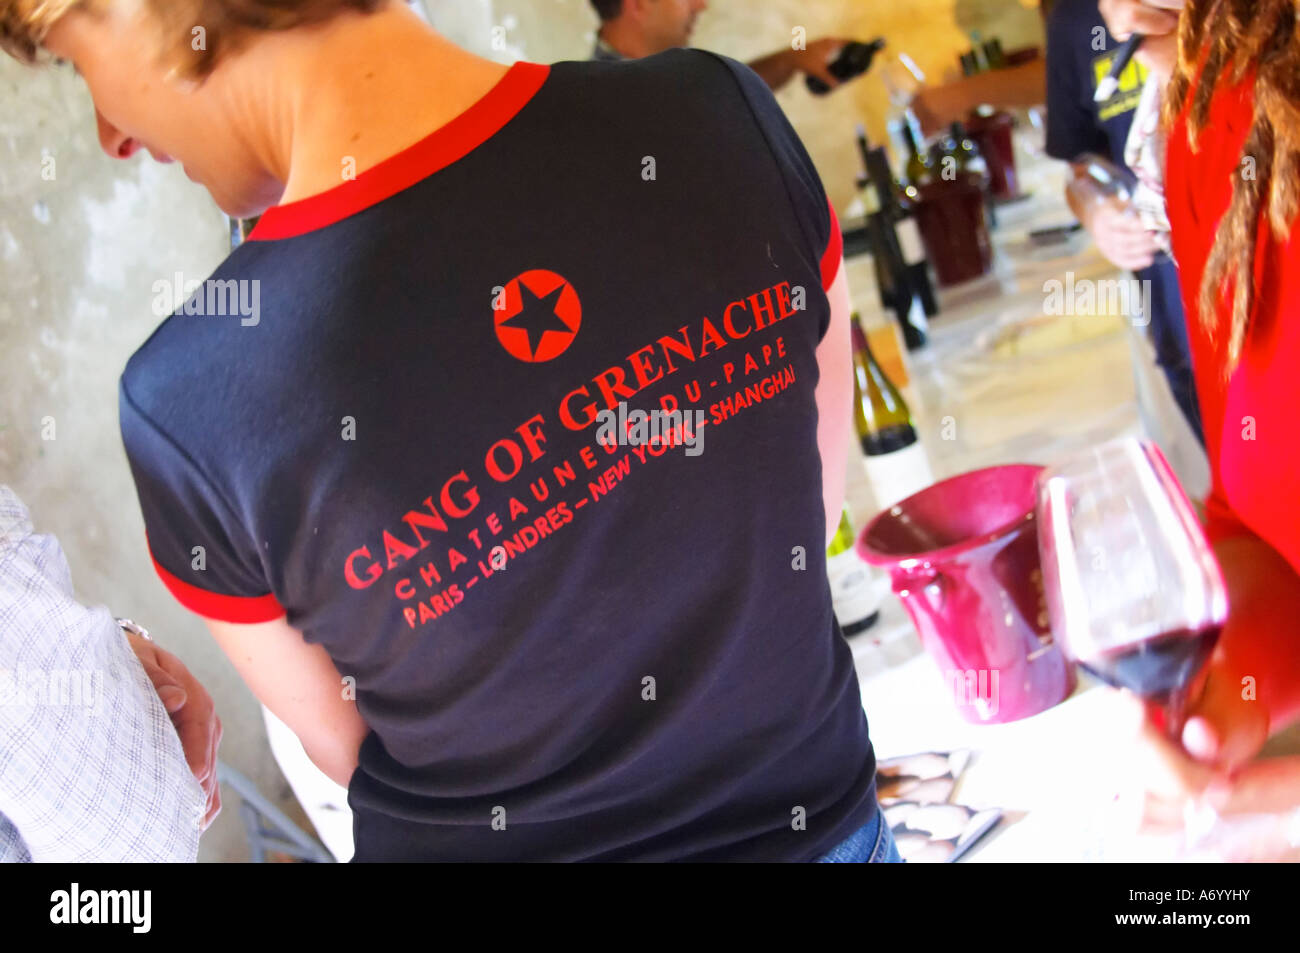 A wine taster with a black t-shirt tshirt saying 'The Gang of Grenache' advertising a group of Chateauneuf-du-Pape growers. Rhone. Tasting wine. Ice bucket. France Europe. Stock Photo